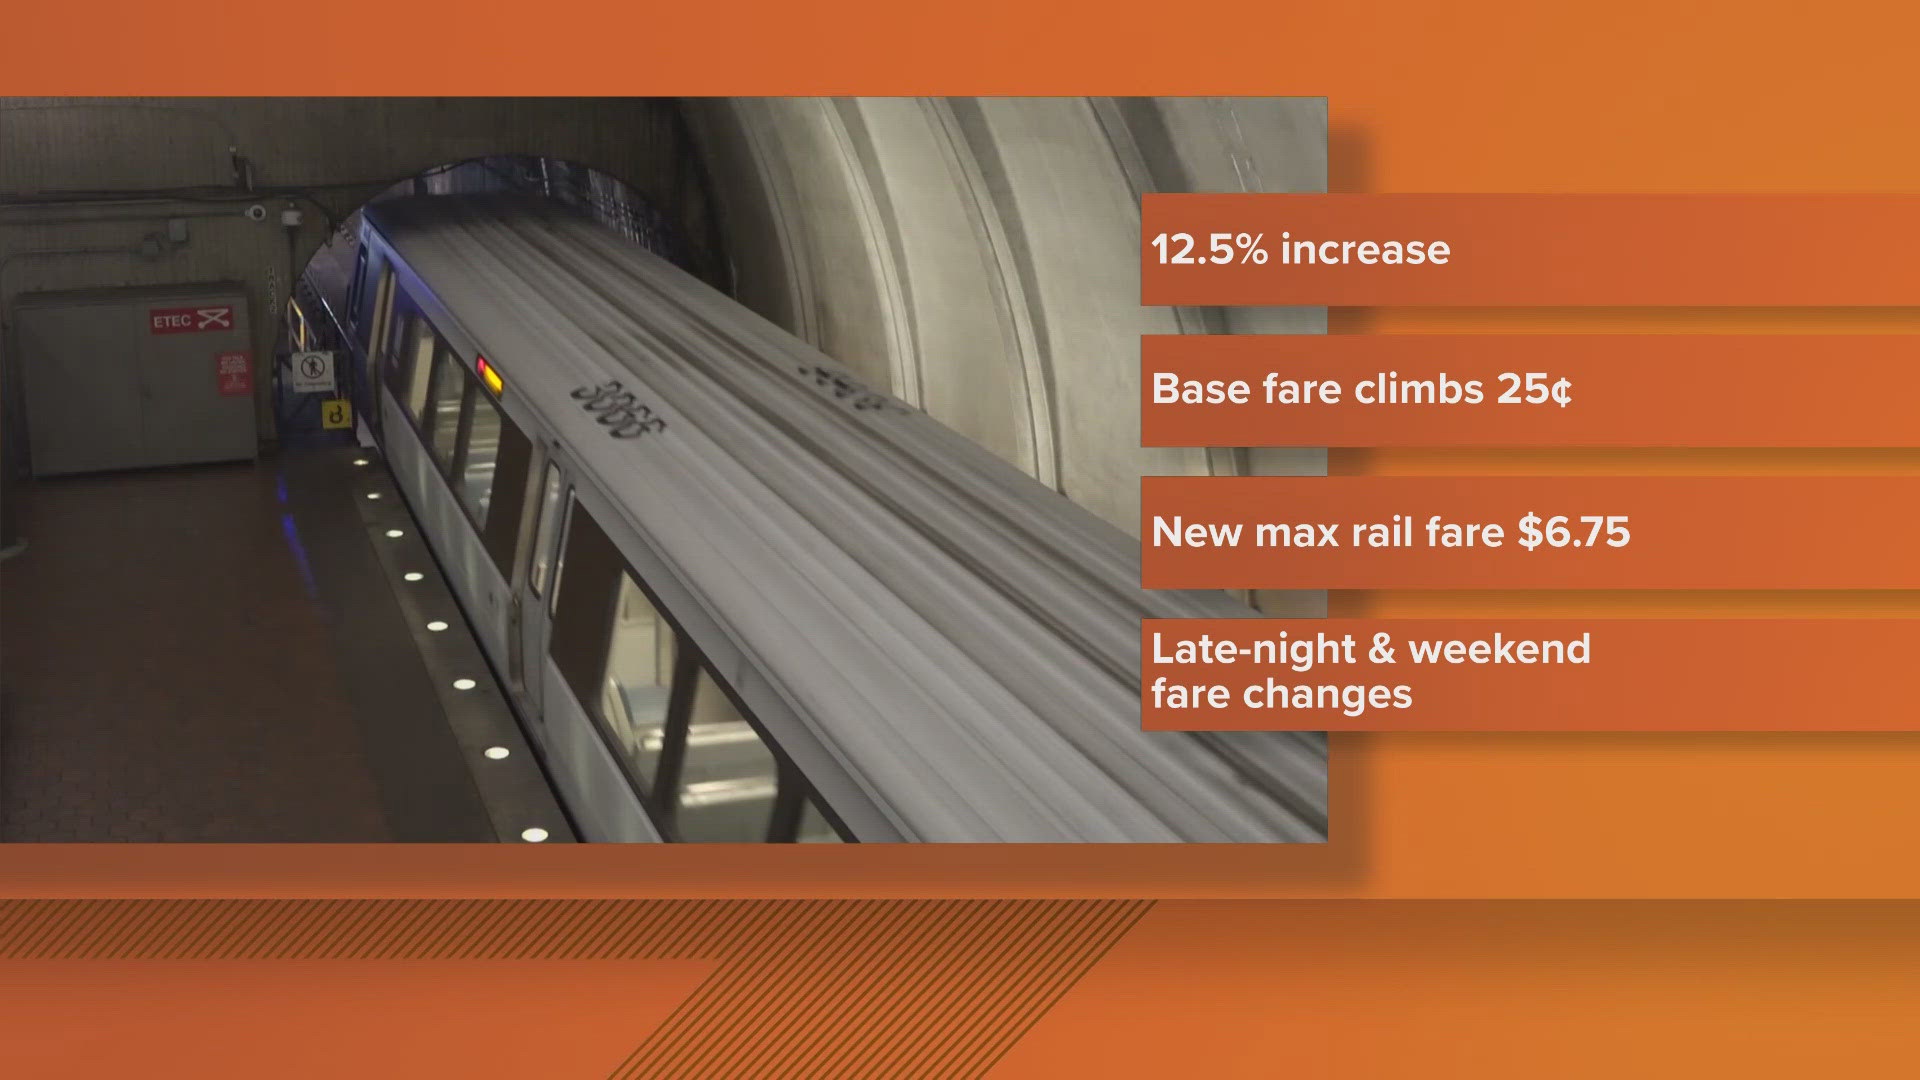 Authorities indicated the fare increased 12.5%. The measure was approved last April.